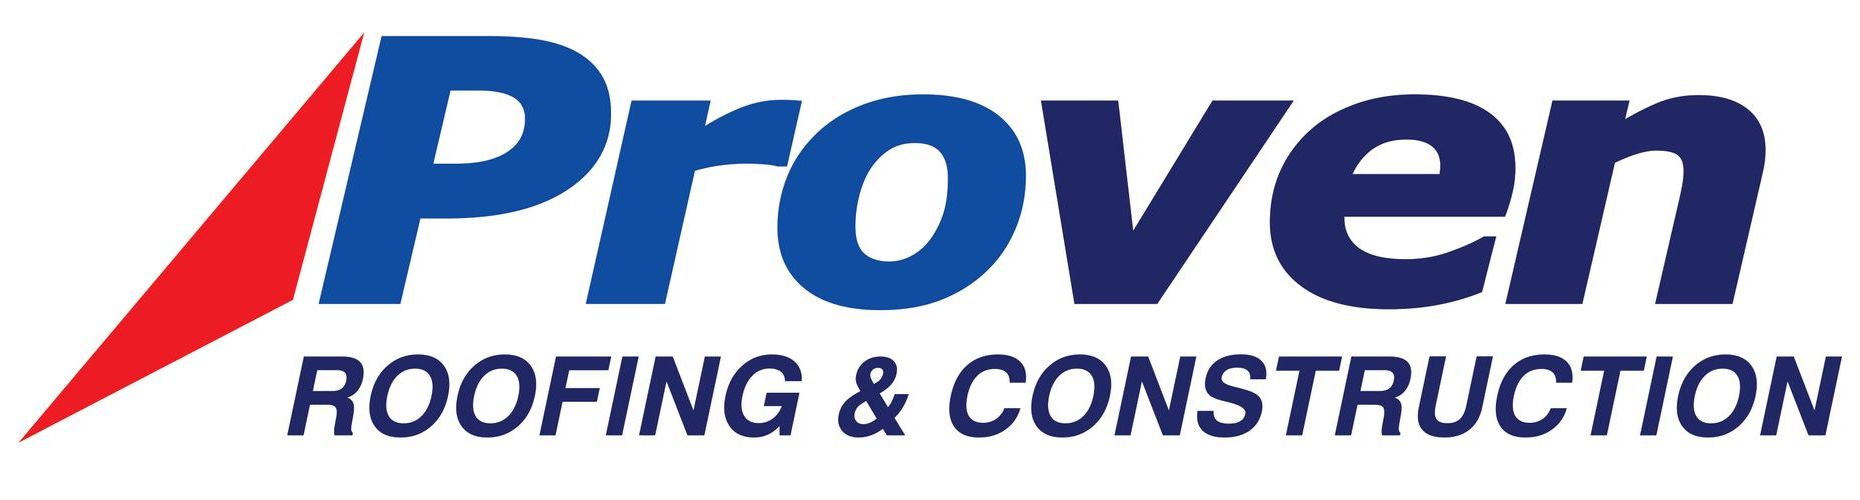 Proven Roofing & Construction - Logo